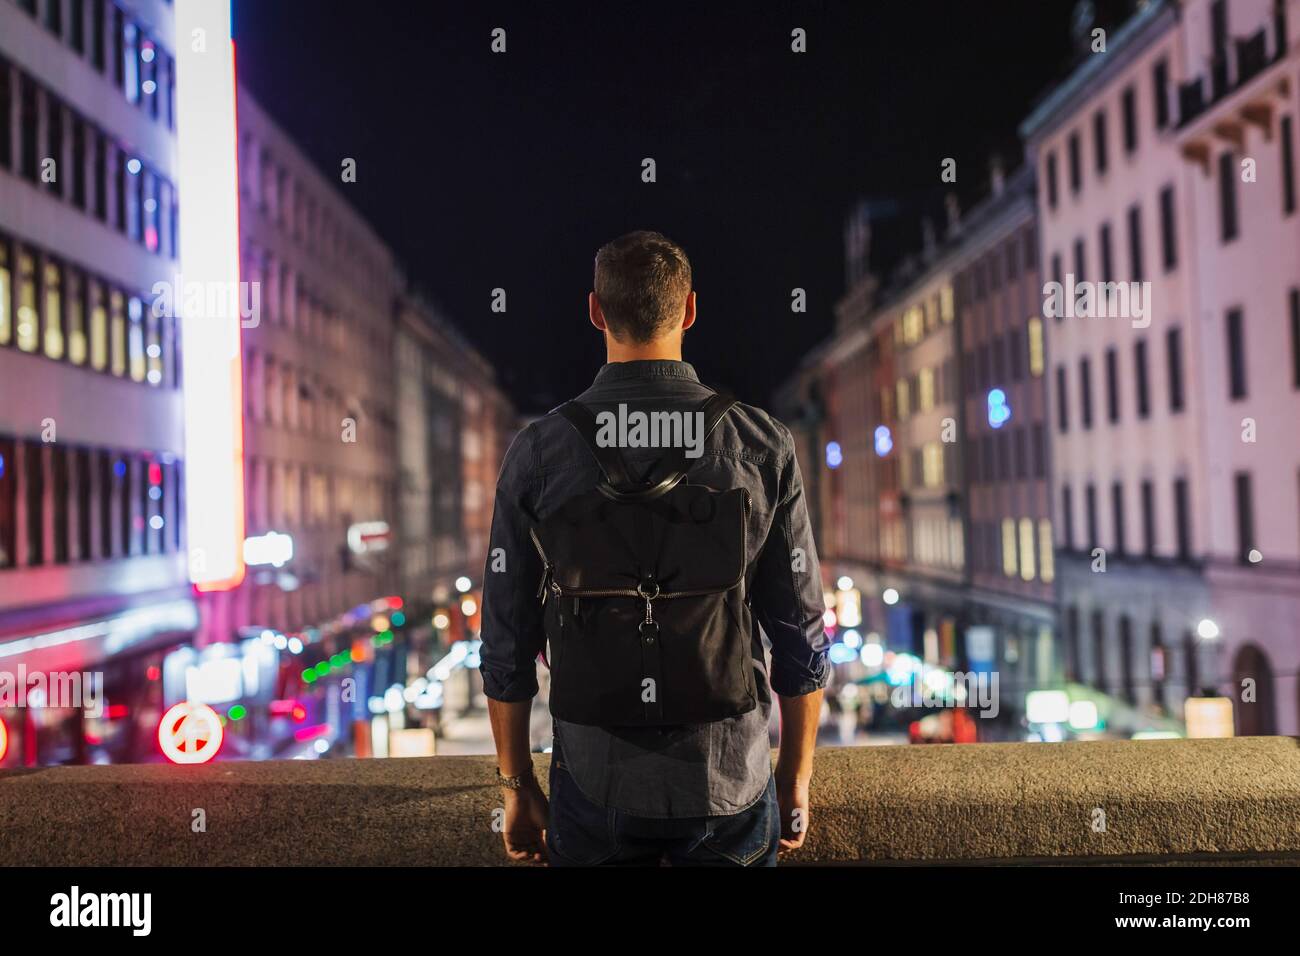 Rear view of man carrying backpack standing on bridge in city at night Stock Photo